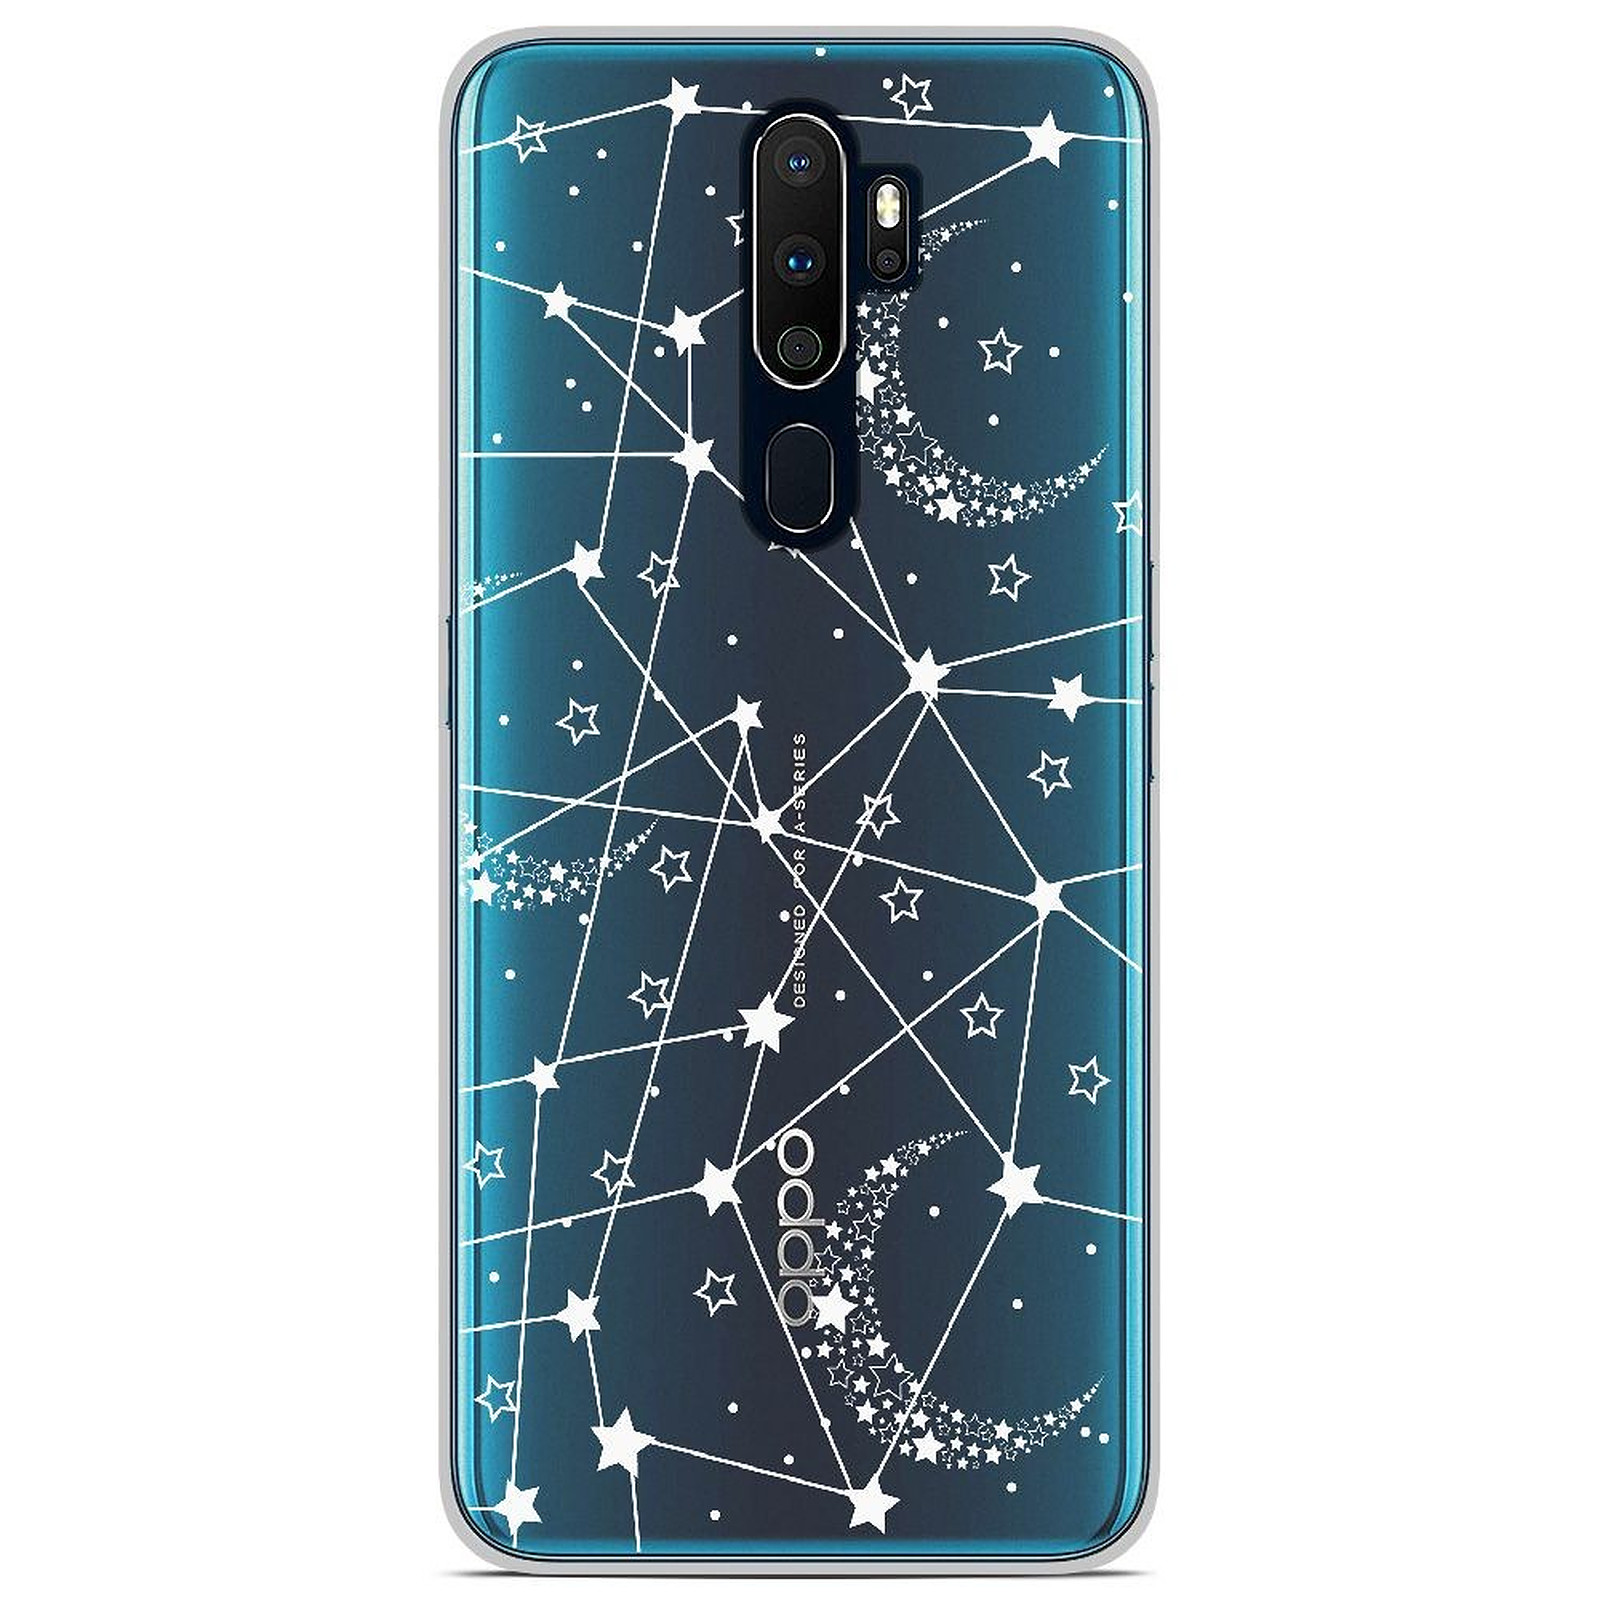 1001 Coques Coque silicone gel Oppo A9 2020 motif Lignes etoilees - Coque telephone 1001Coques